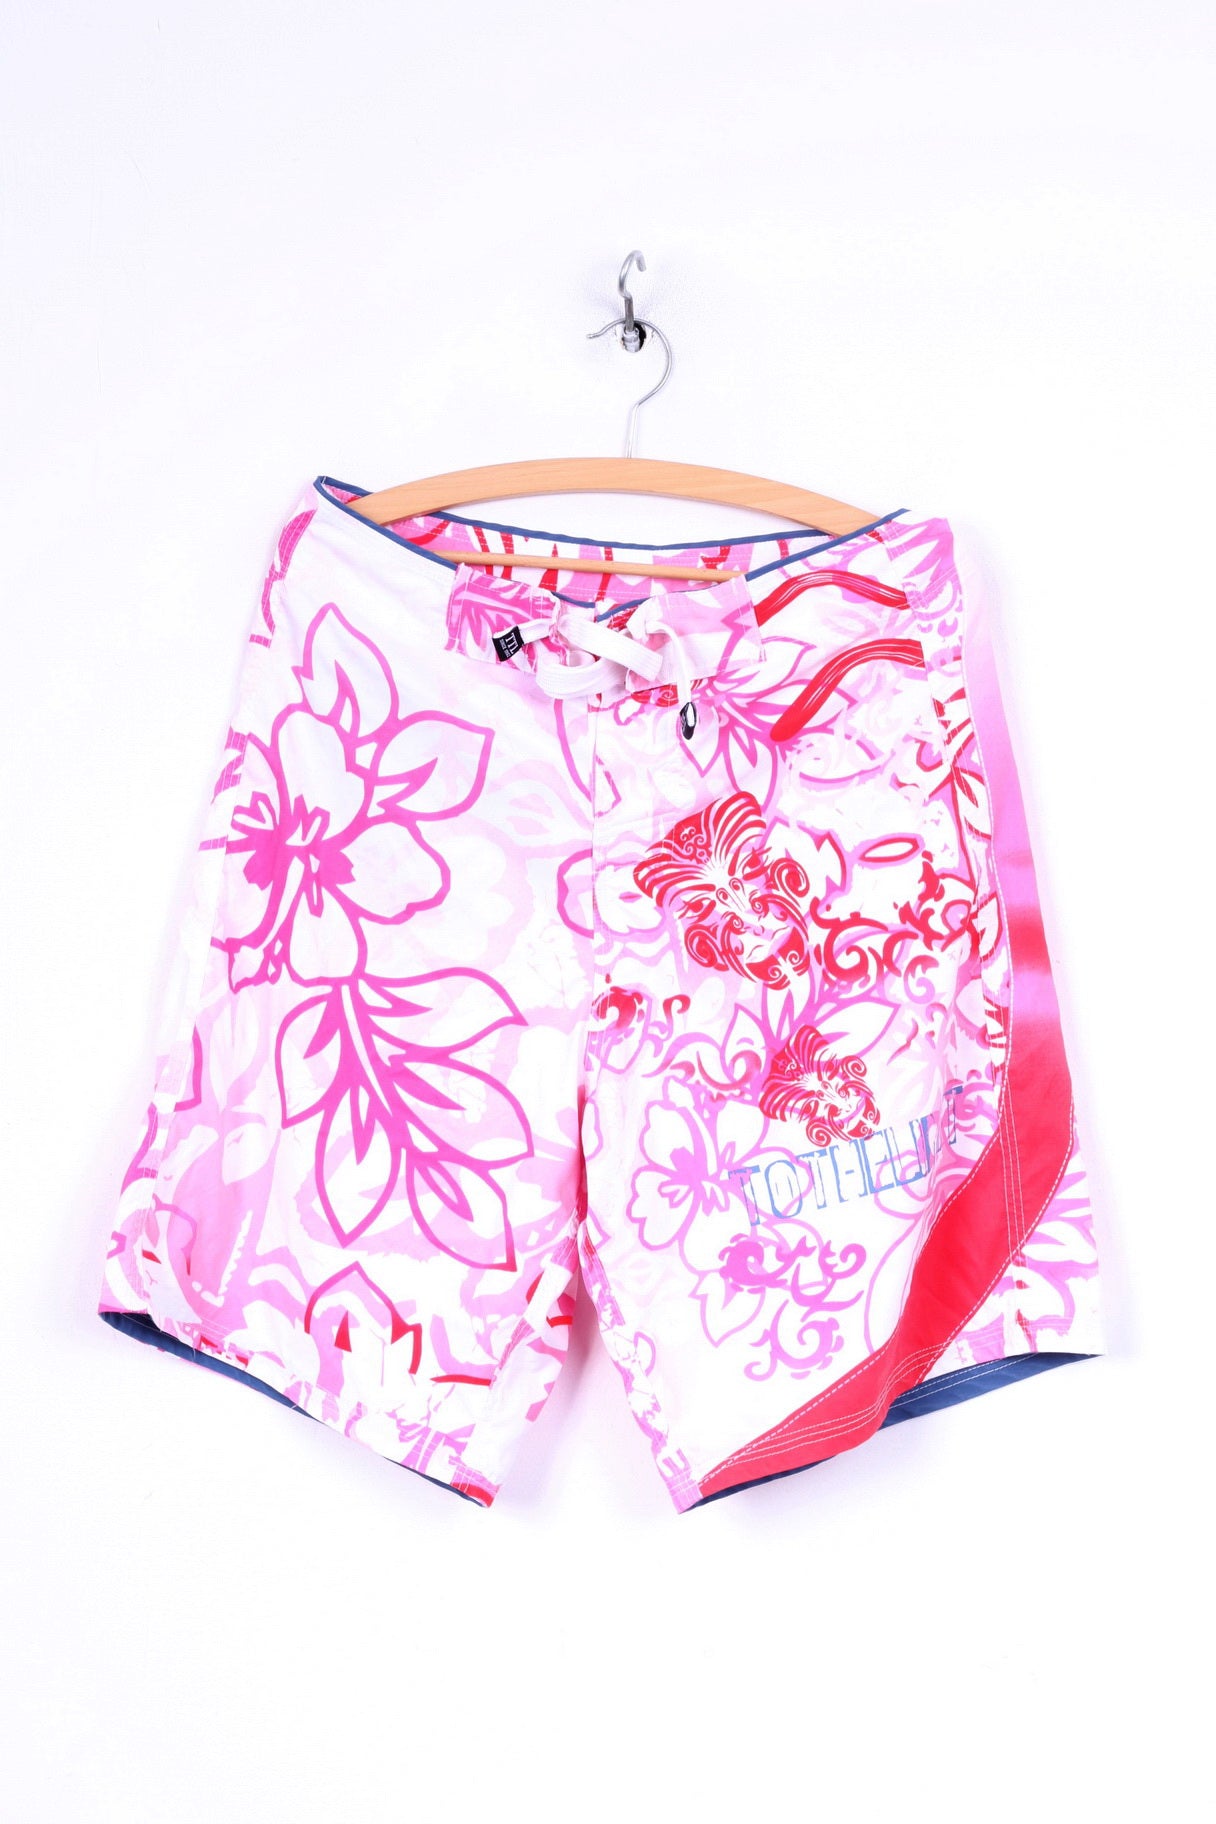 To The Limit Mens 50 L Shorts White/Pink Summer Beach Swimpants